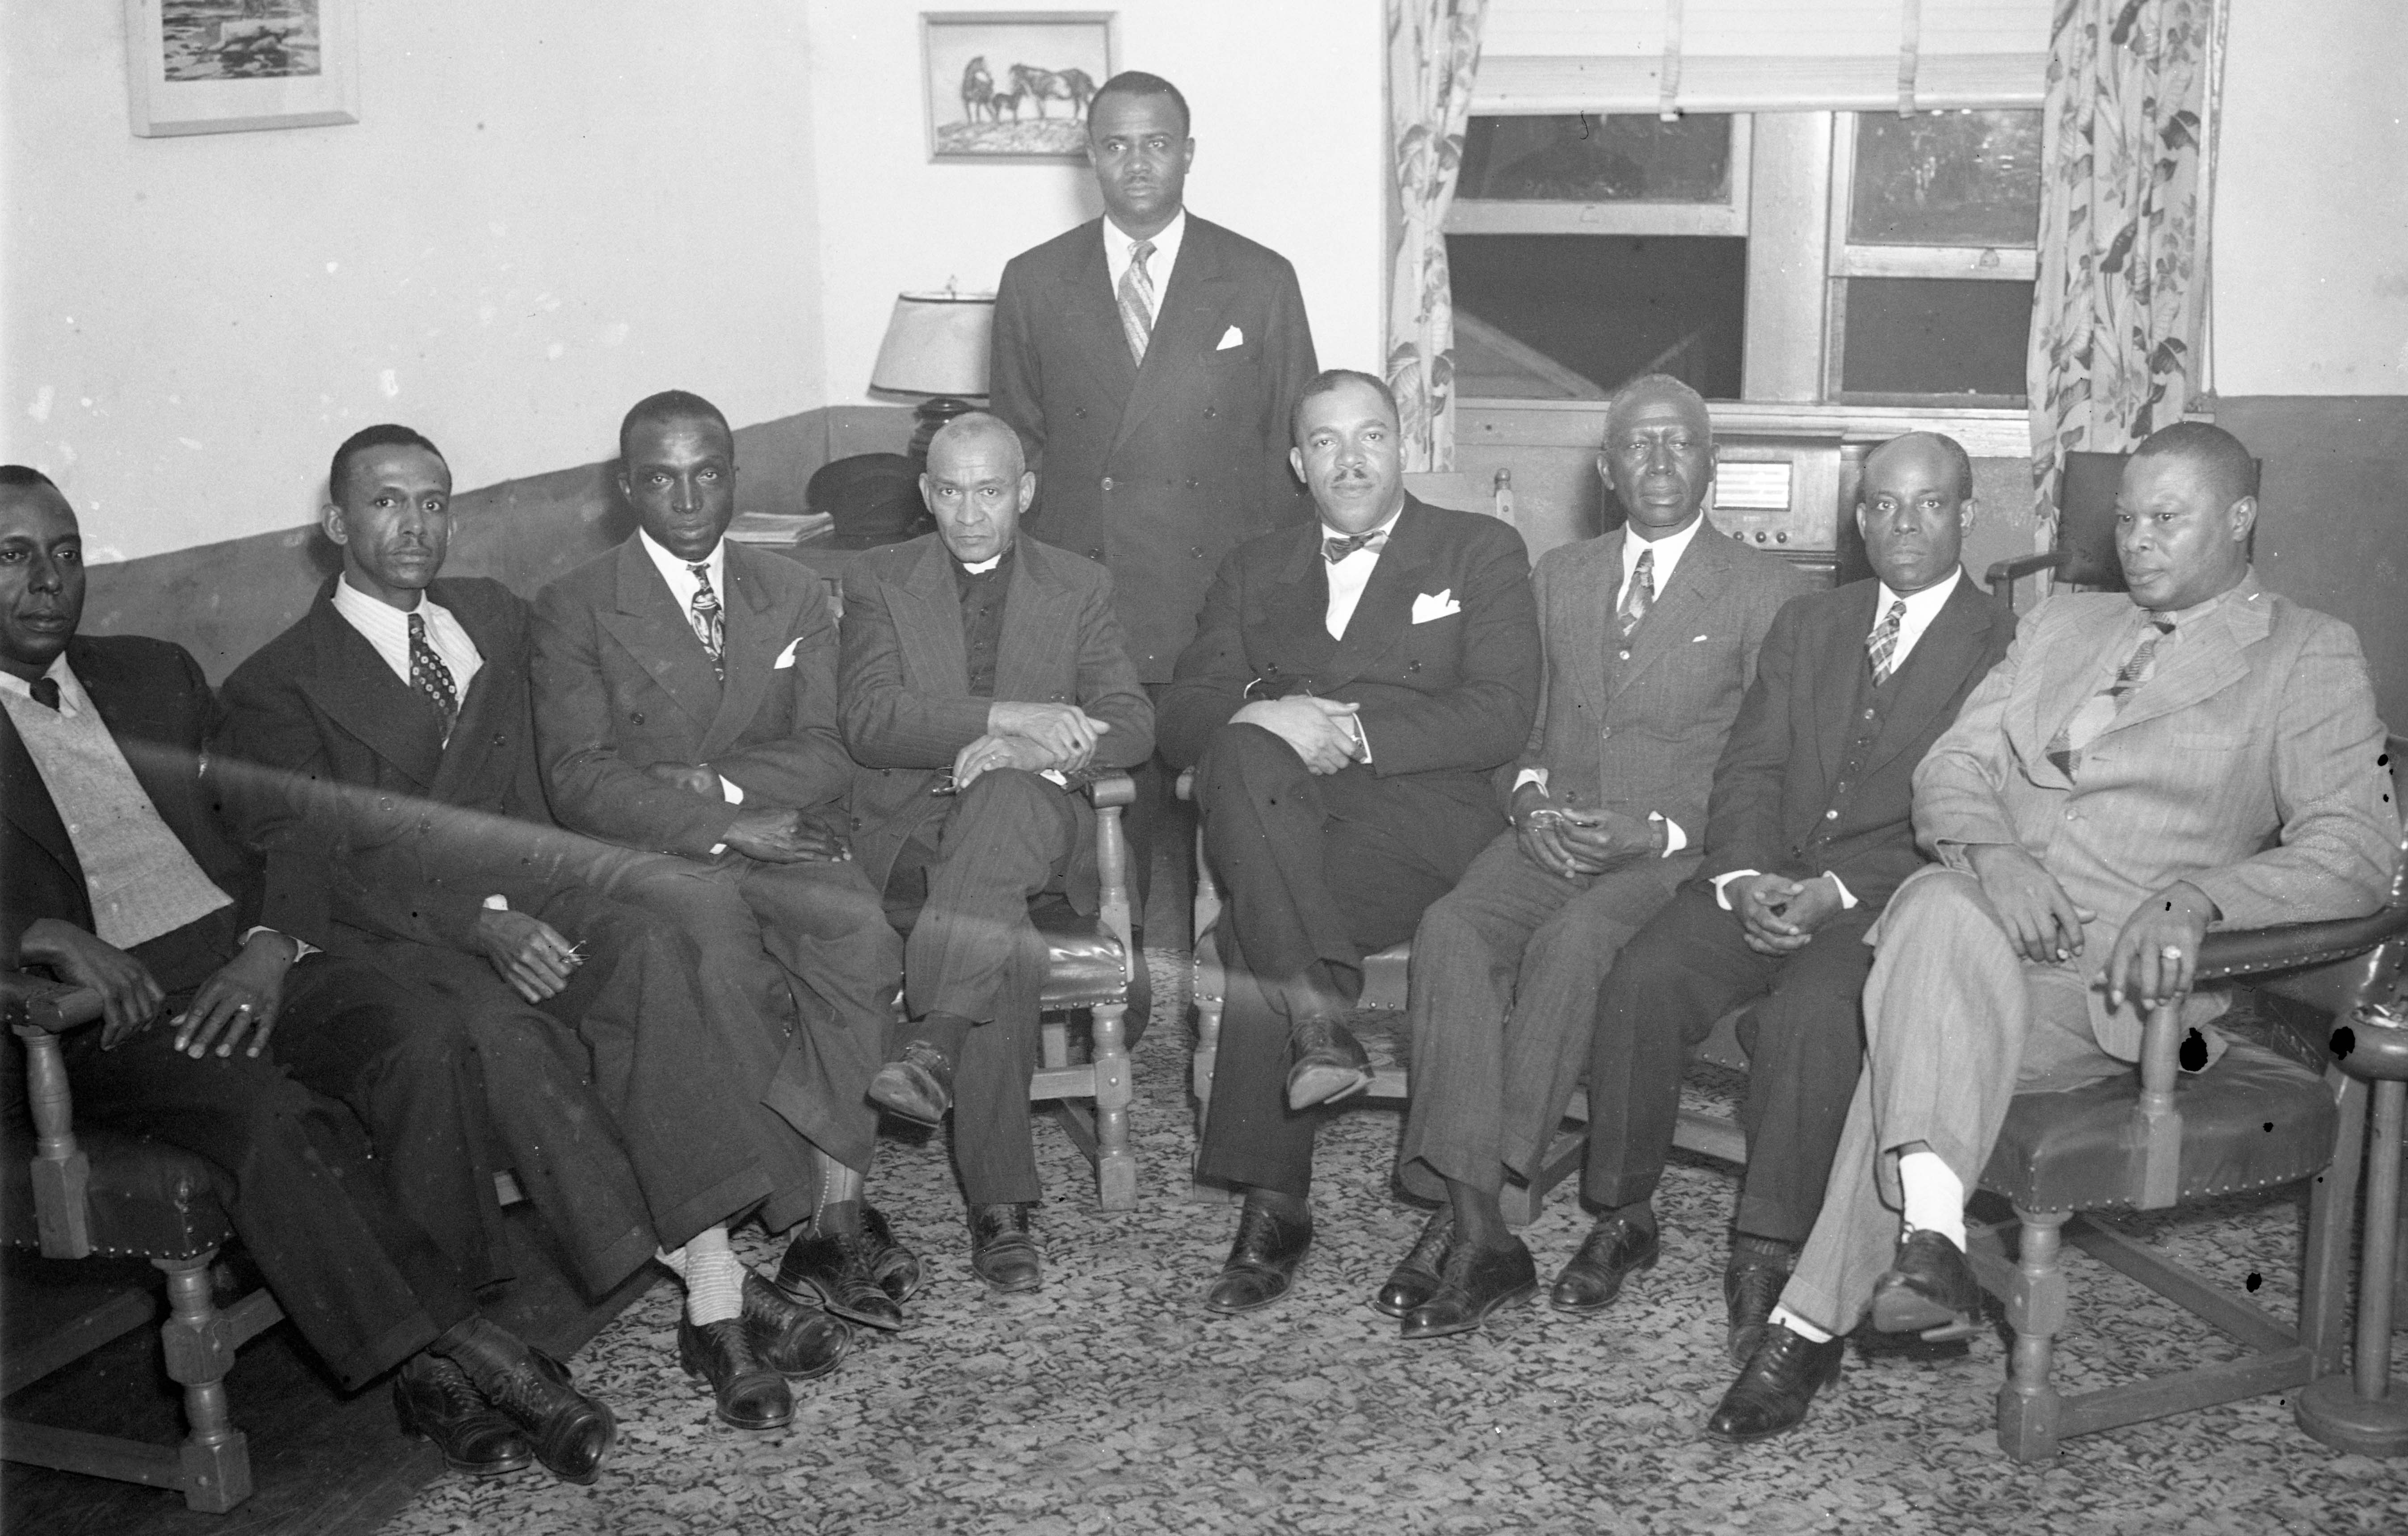 Jack Young Sr., pictured second from left, was one of three lawyers who took on civil rights cases in the 1950s and early 1960s. Photo by Richard H. Beadle.